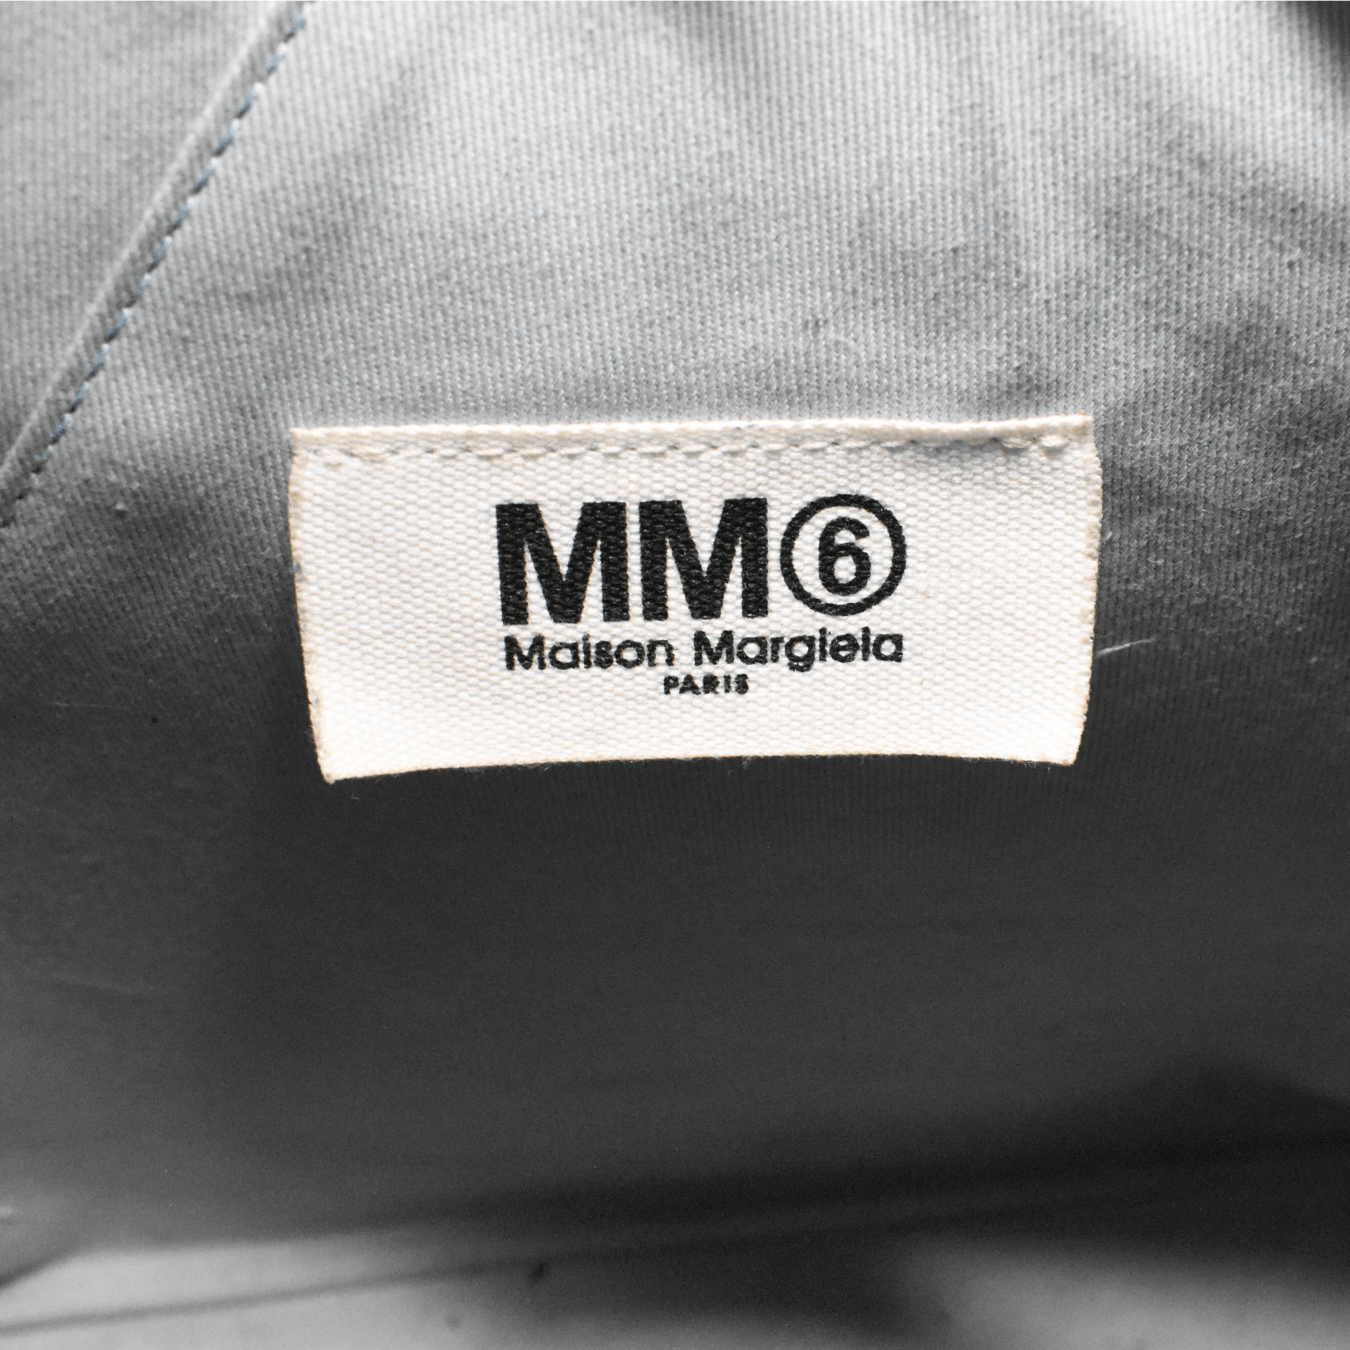 MM6 'Borsa' Tote Bag - Fashionably Yours